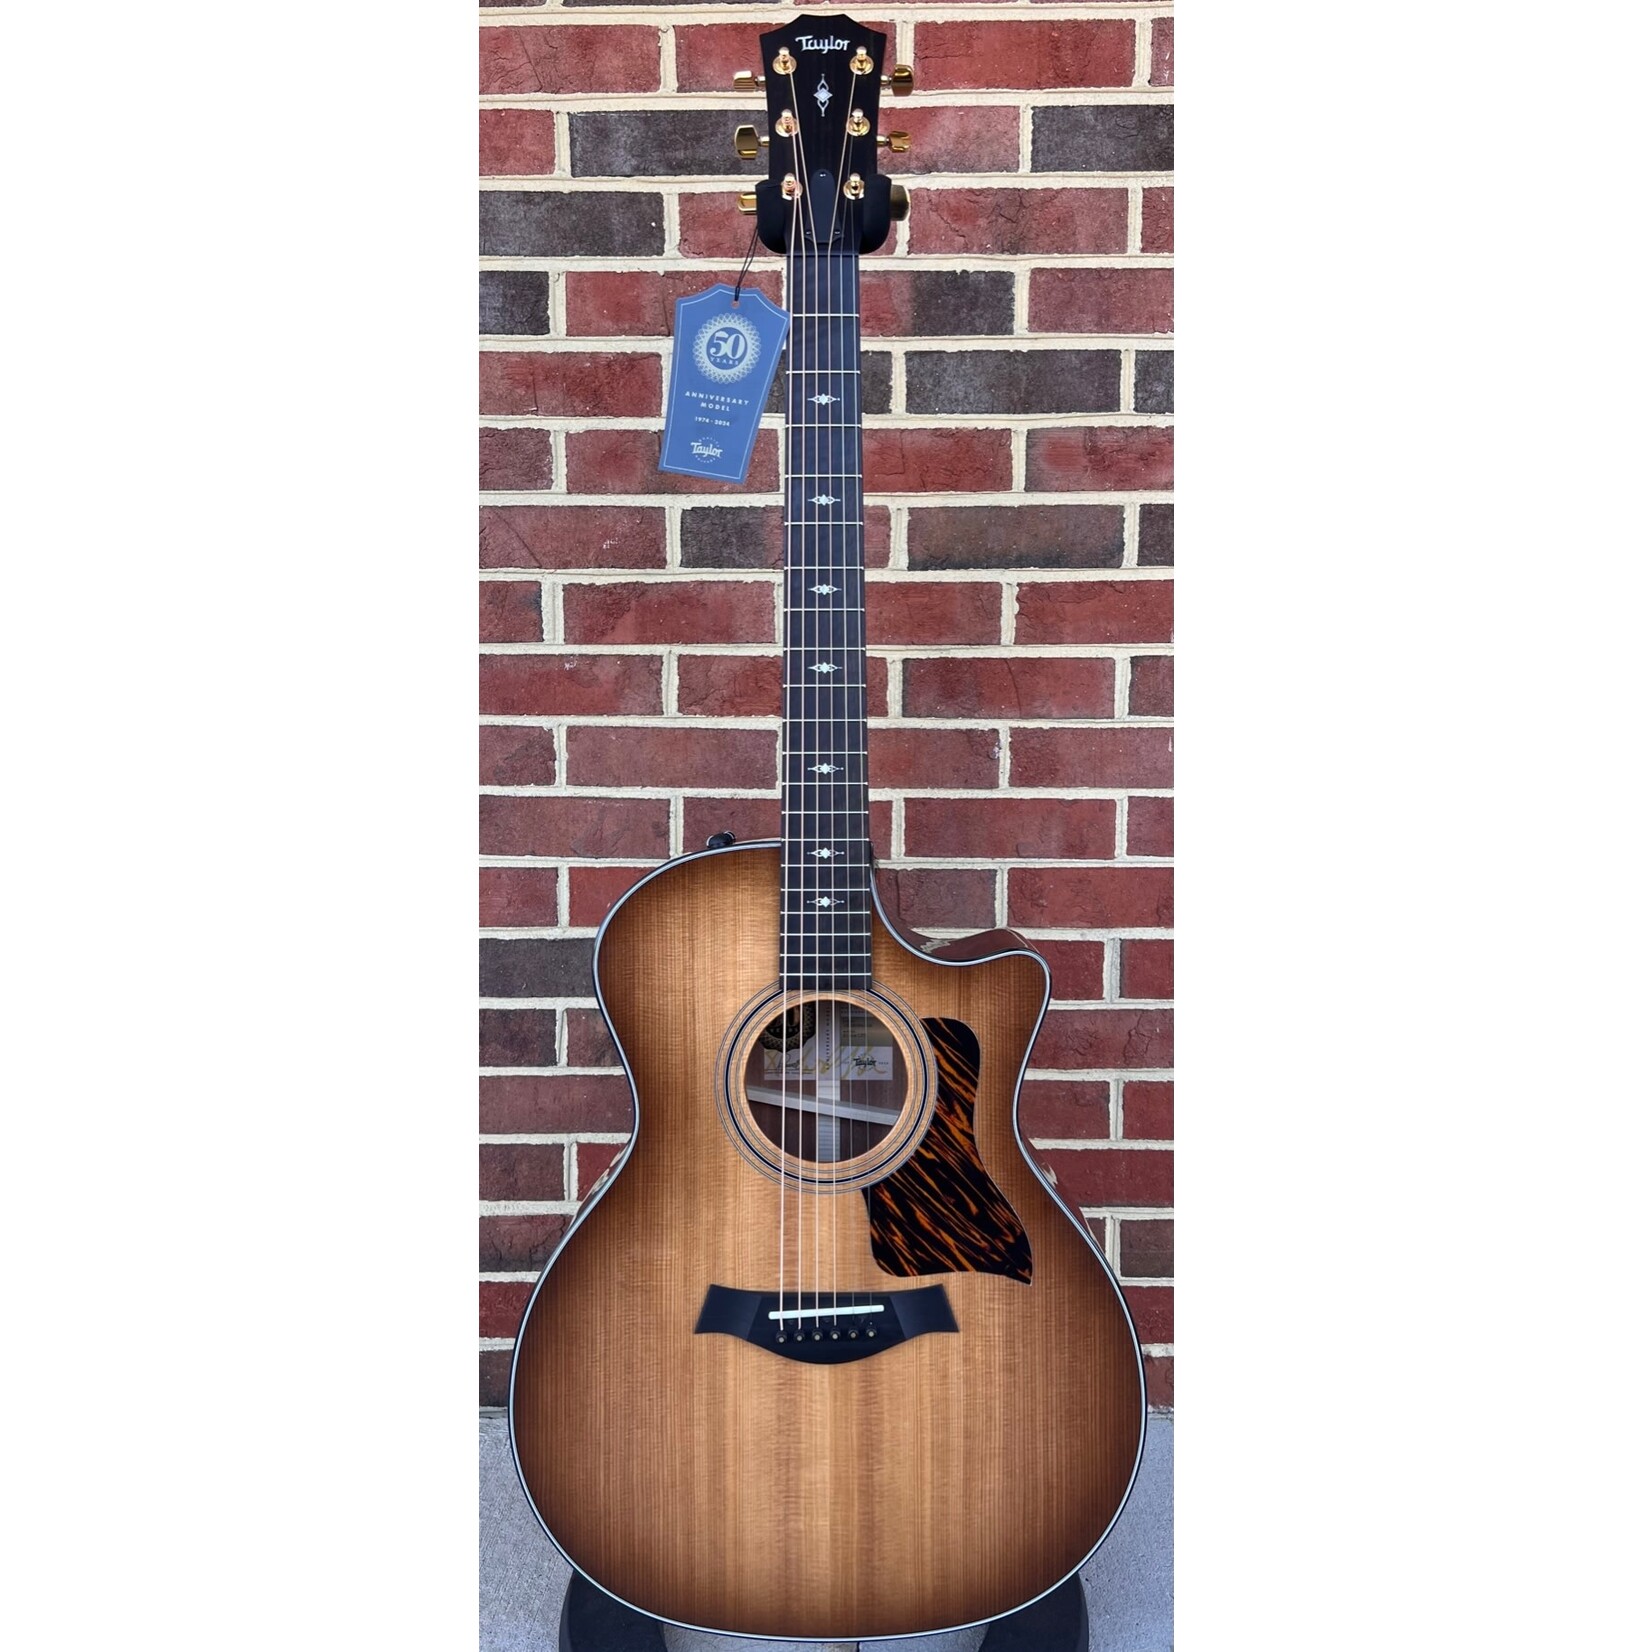 Taylor Taylor 50th Anniversary 314ce LTD, Shaded Edge Burst, Solid Torrefied Sitka Spruce Top, Sapele Back & Sides, ES2 Electronics, Hardshell Case